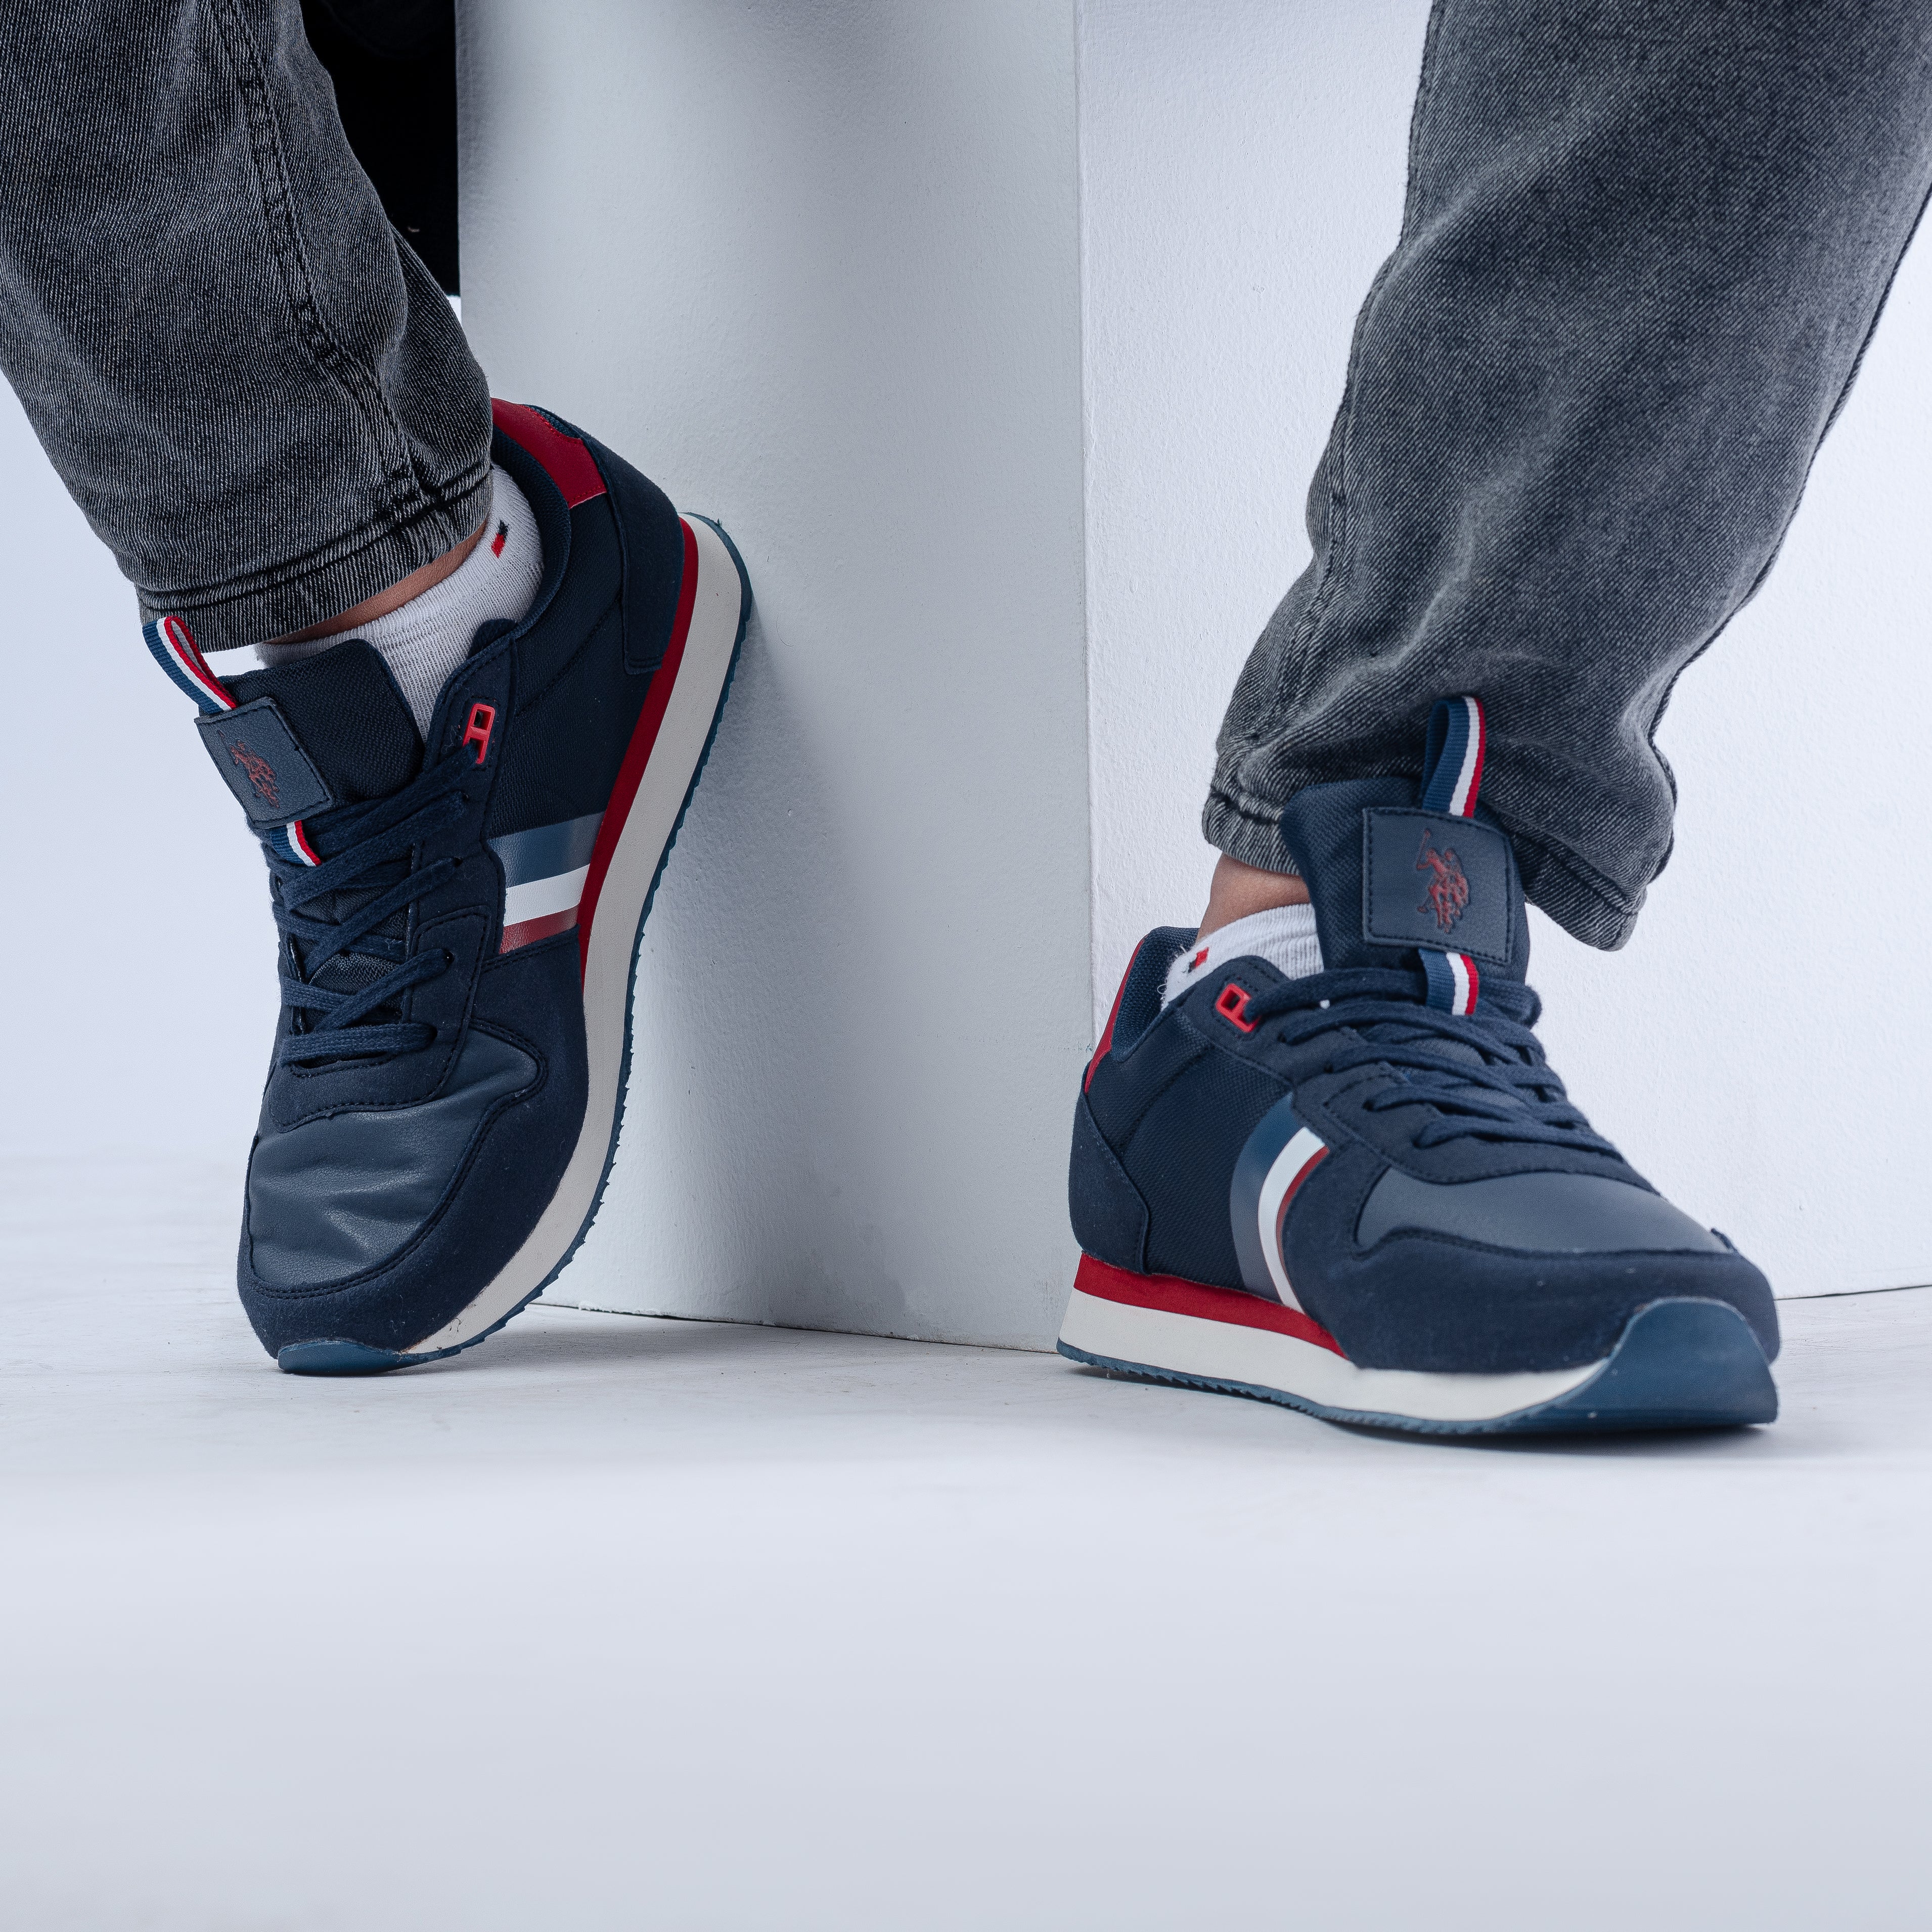 Looking for These Tommy Hilfiger Shoes : r/repbudgetsneakers